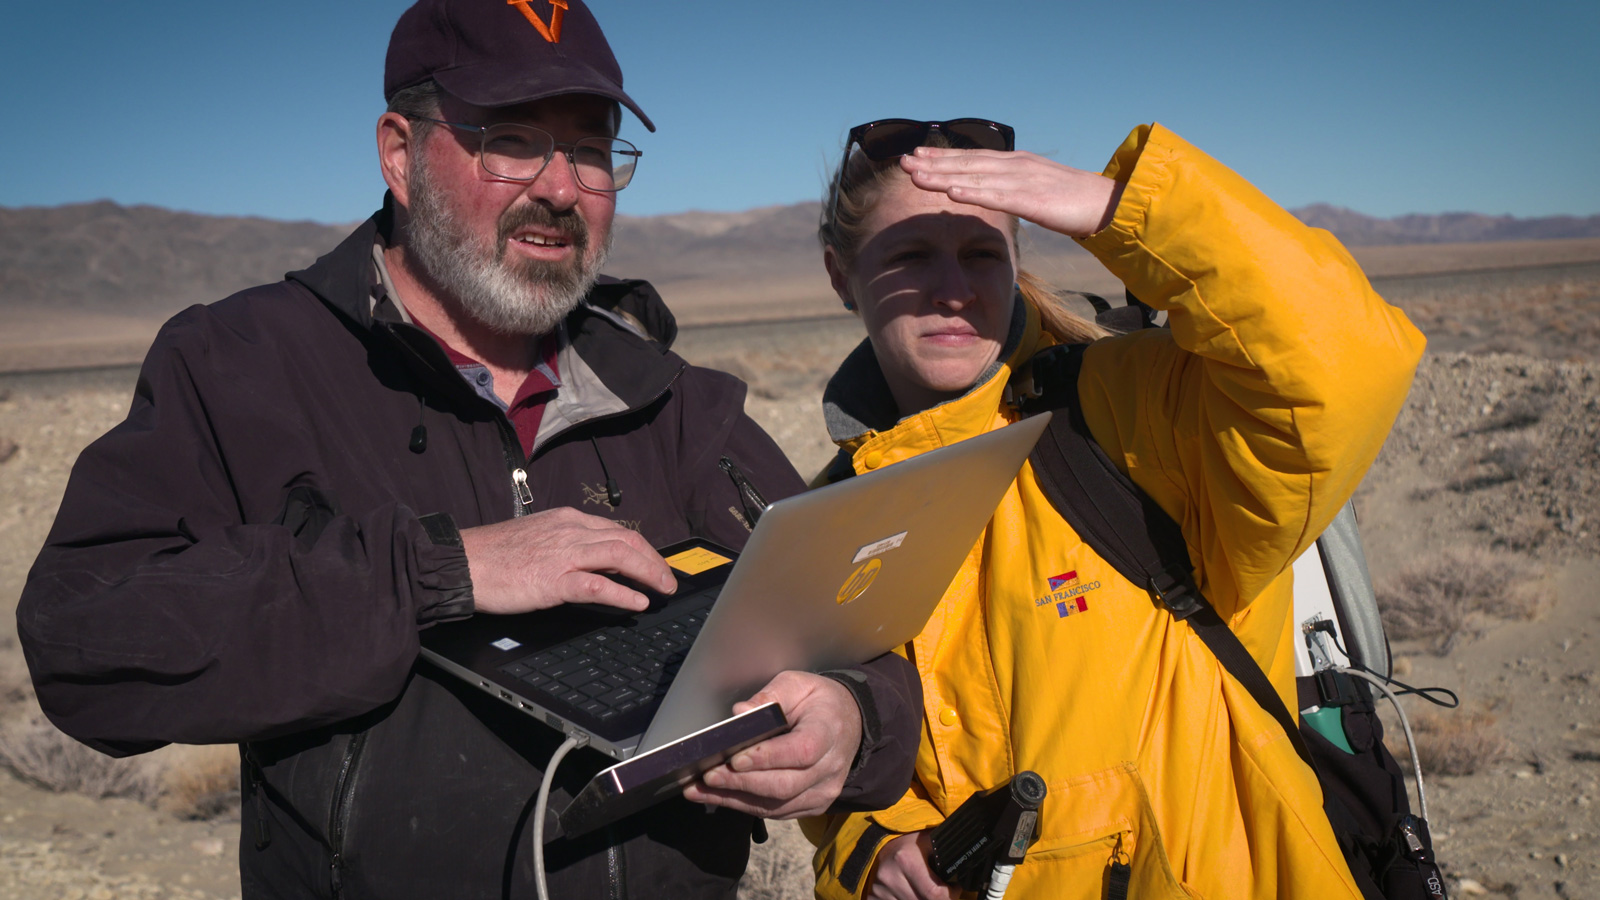 Two JPL scientists in a dry lakebed in the Nevada desert